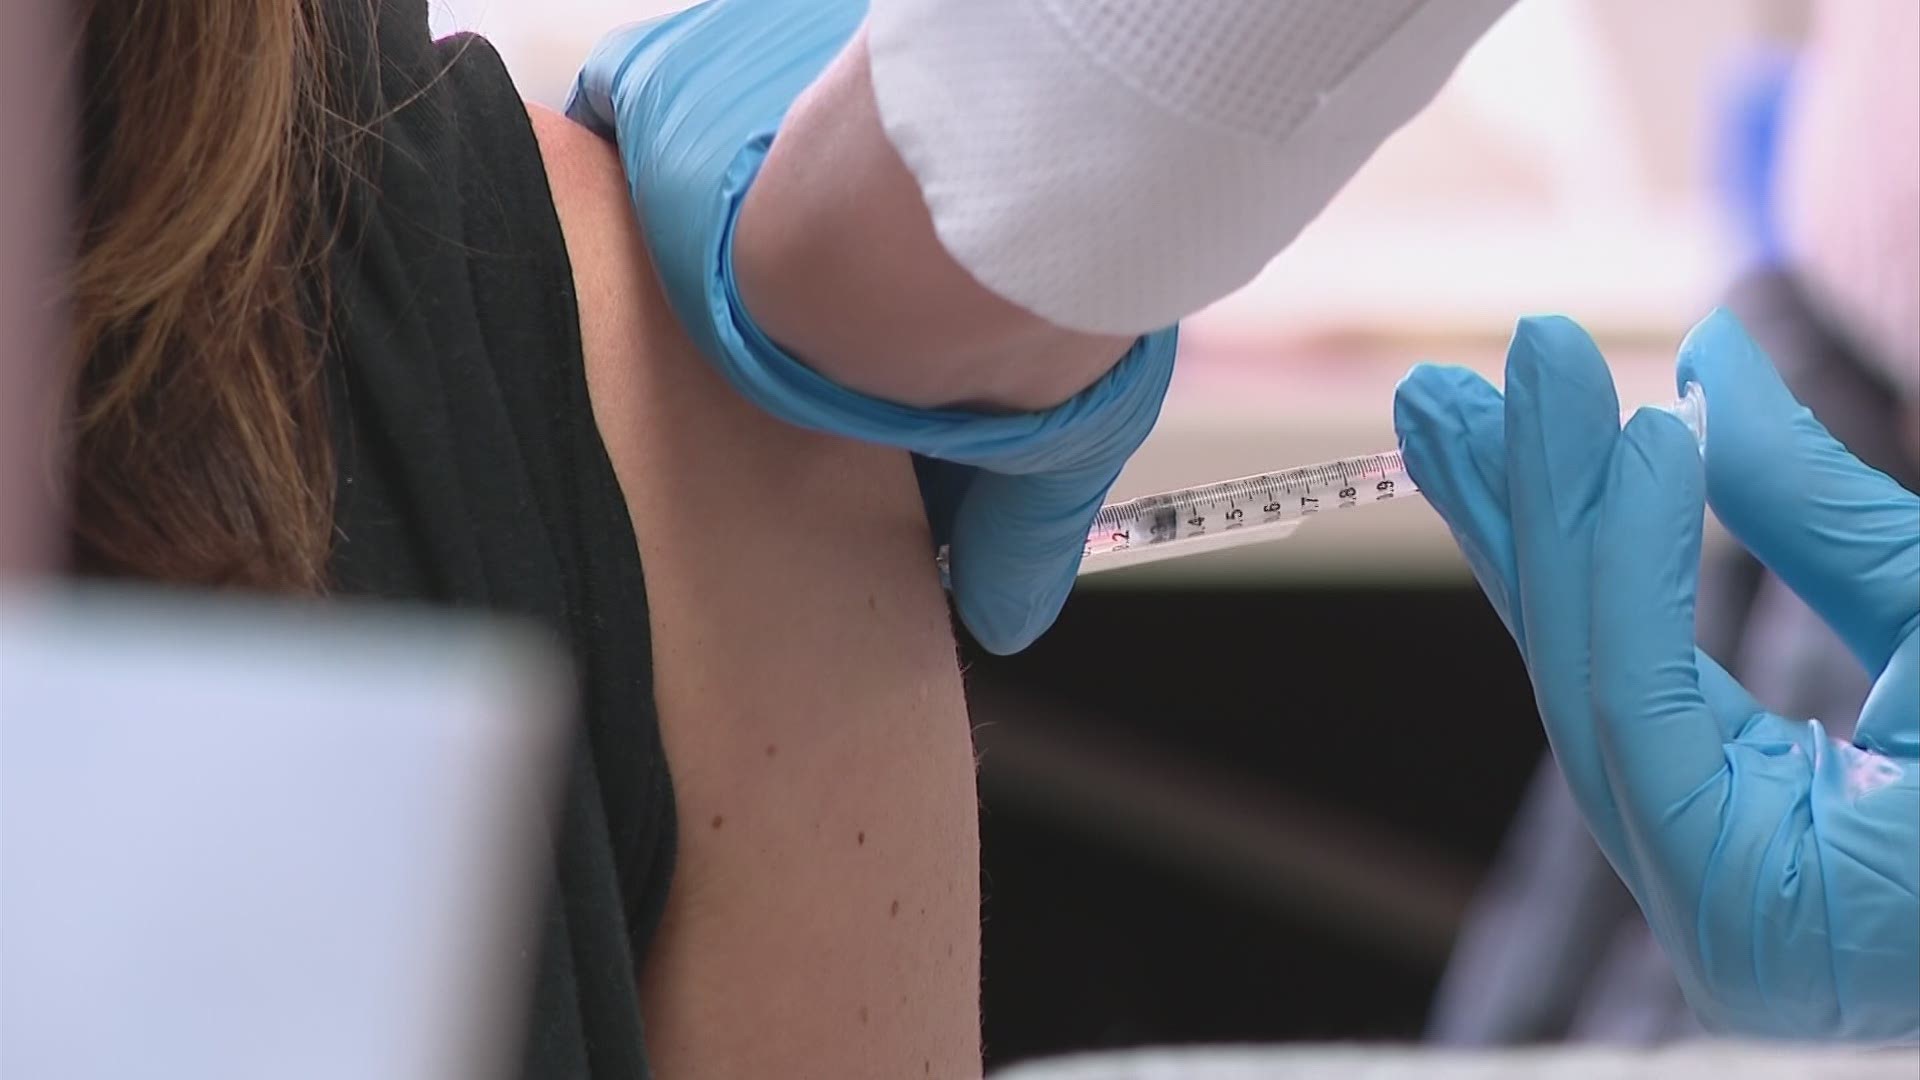 With people choosing not to get the shot, could that hurt the state's ability to achieve herd immunity?